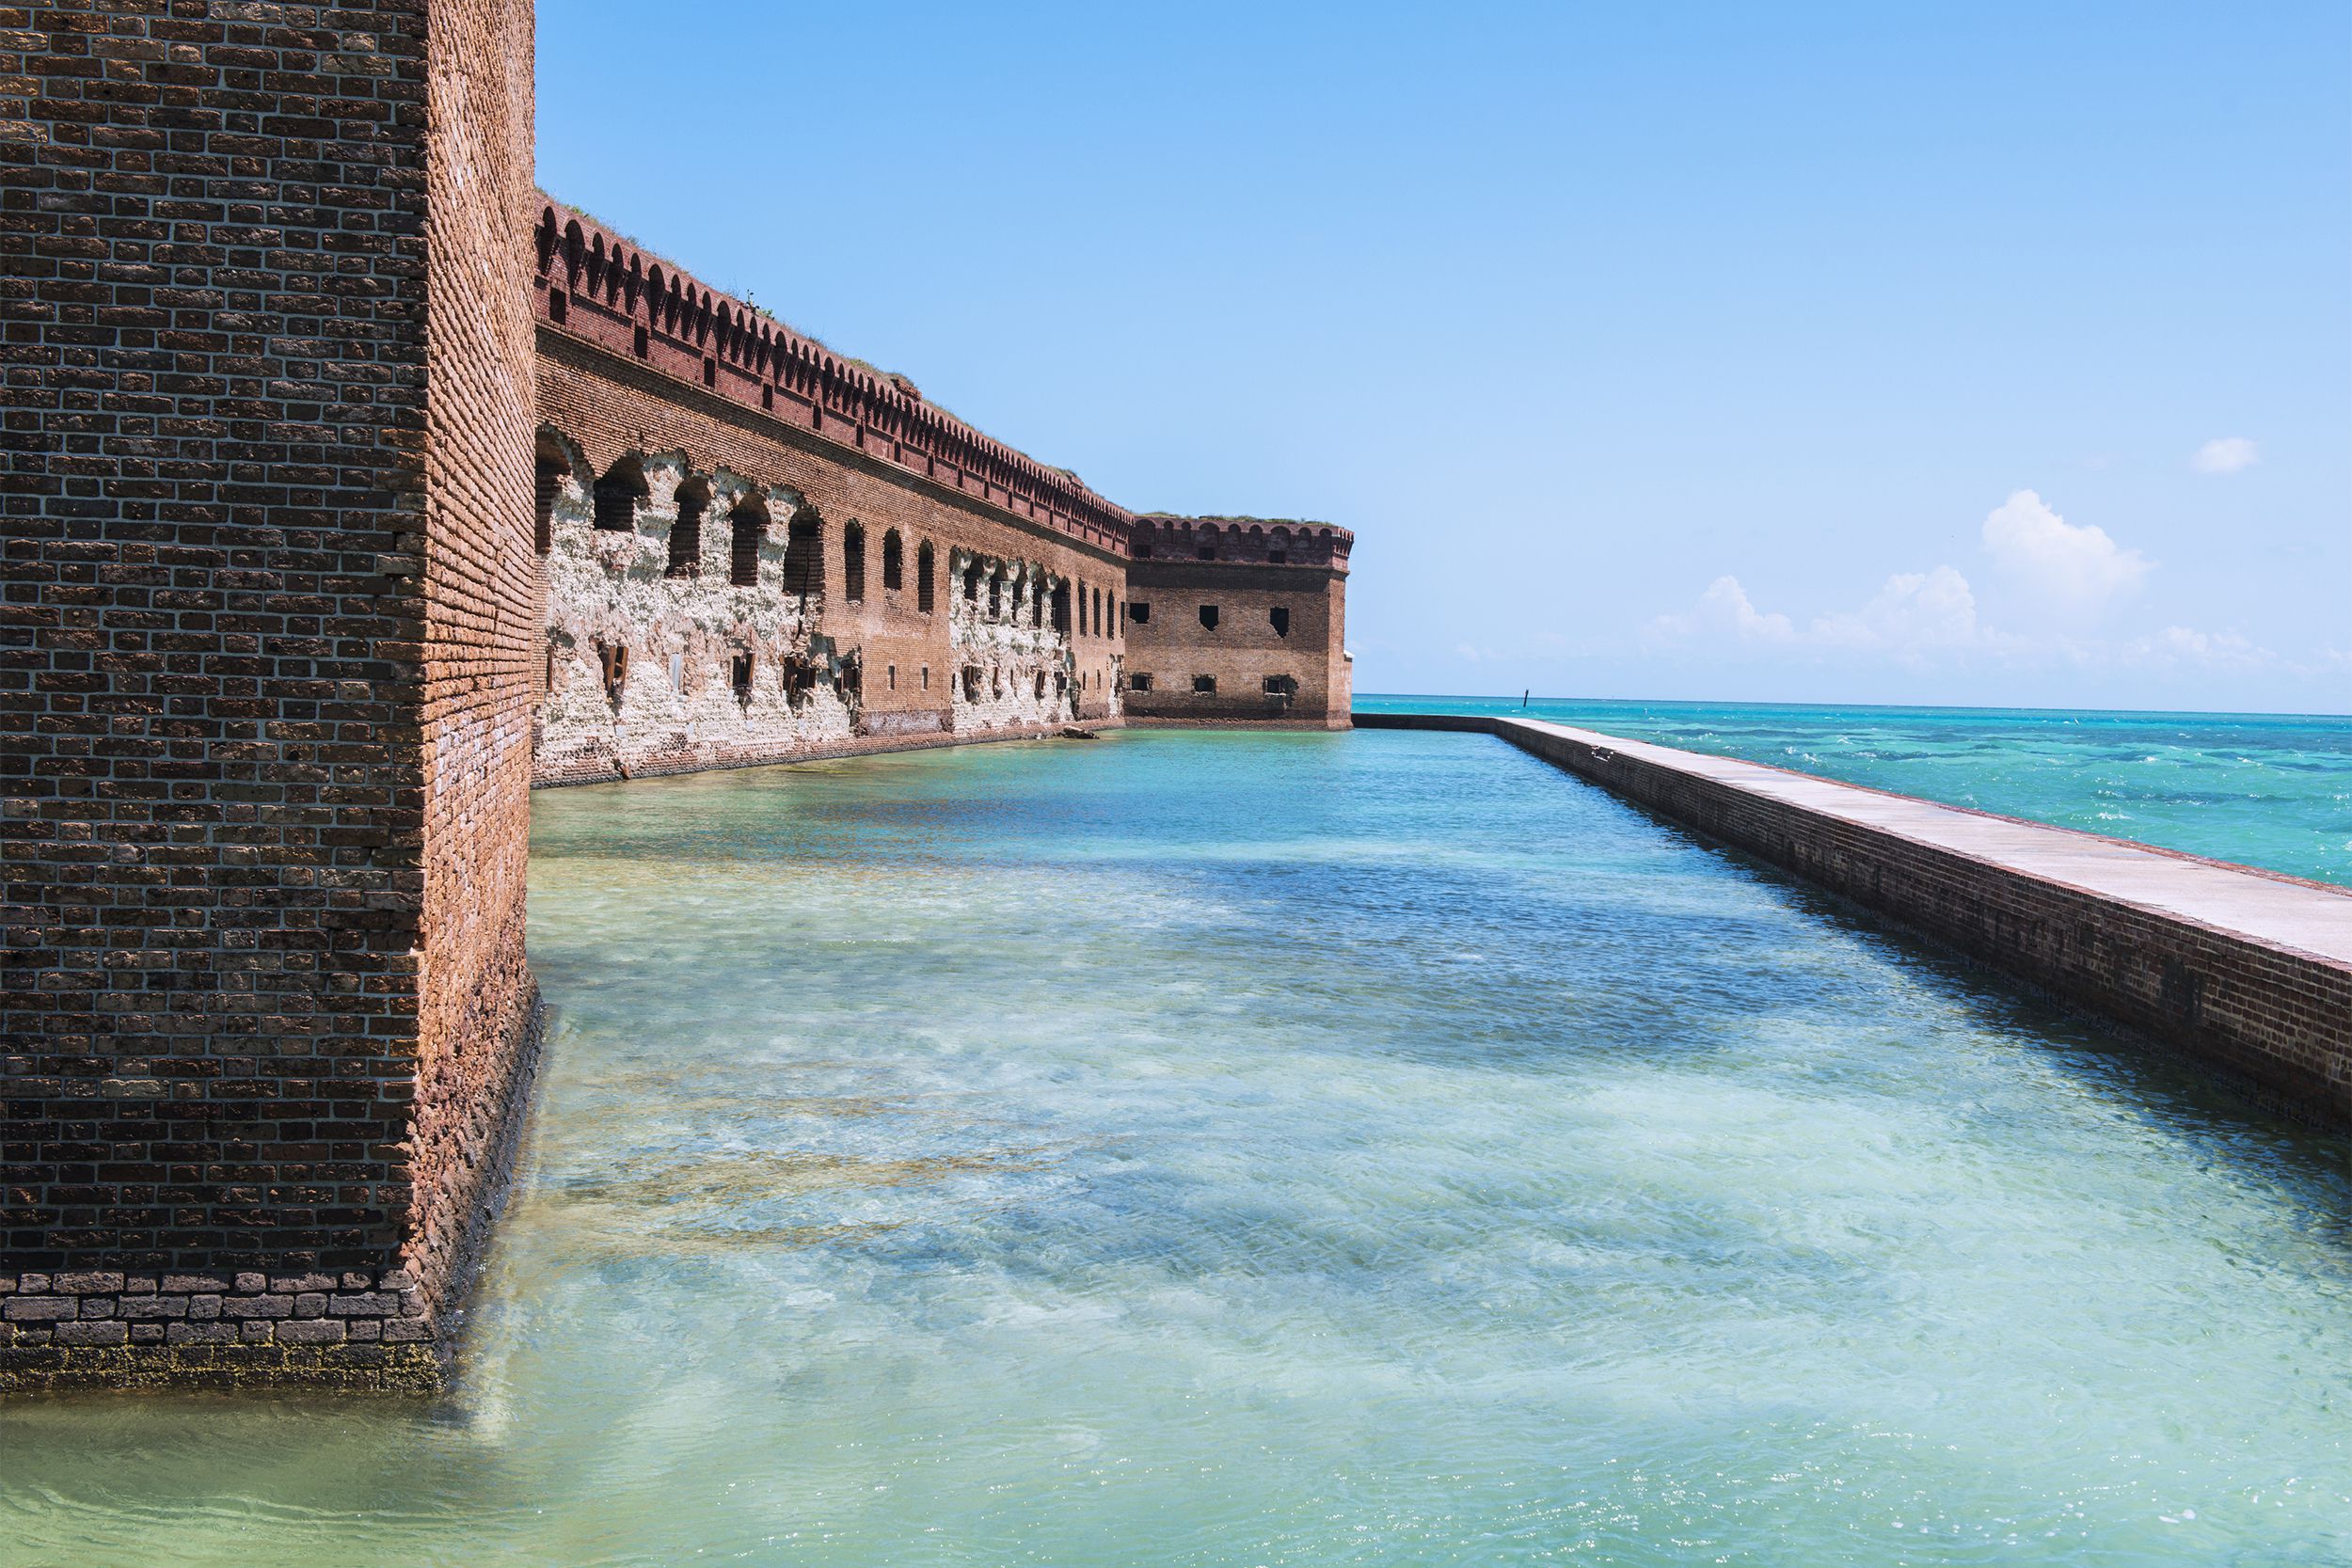 The remote <a href="https://www.nps.gov/drto/index.htm">Dry Tortugas National Park</a>, located about 70 miles west of Key West, is a 100-square mile park made up primarily of open water. There are also seven small islands. This park can only be explored by boat, or perhaps seaplane. Its highlights include Fort Jefferson, coral reefs, and a variety of bird life.